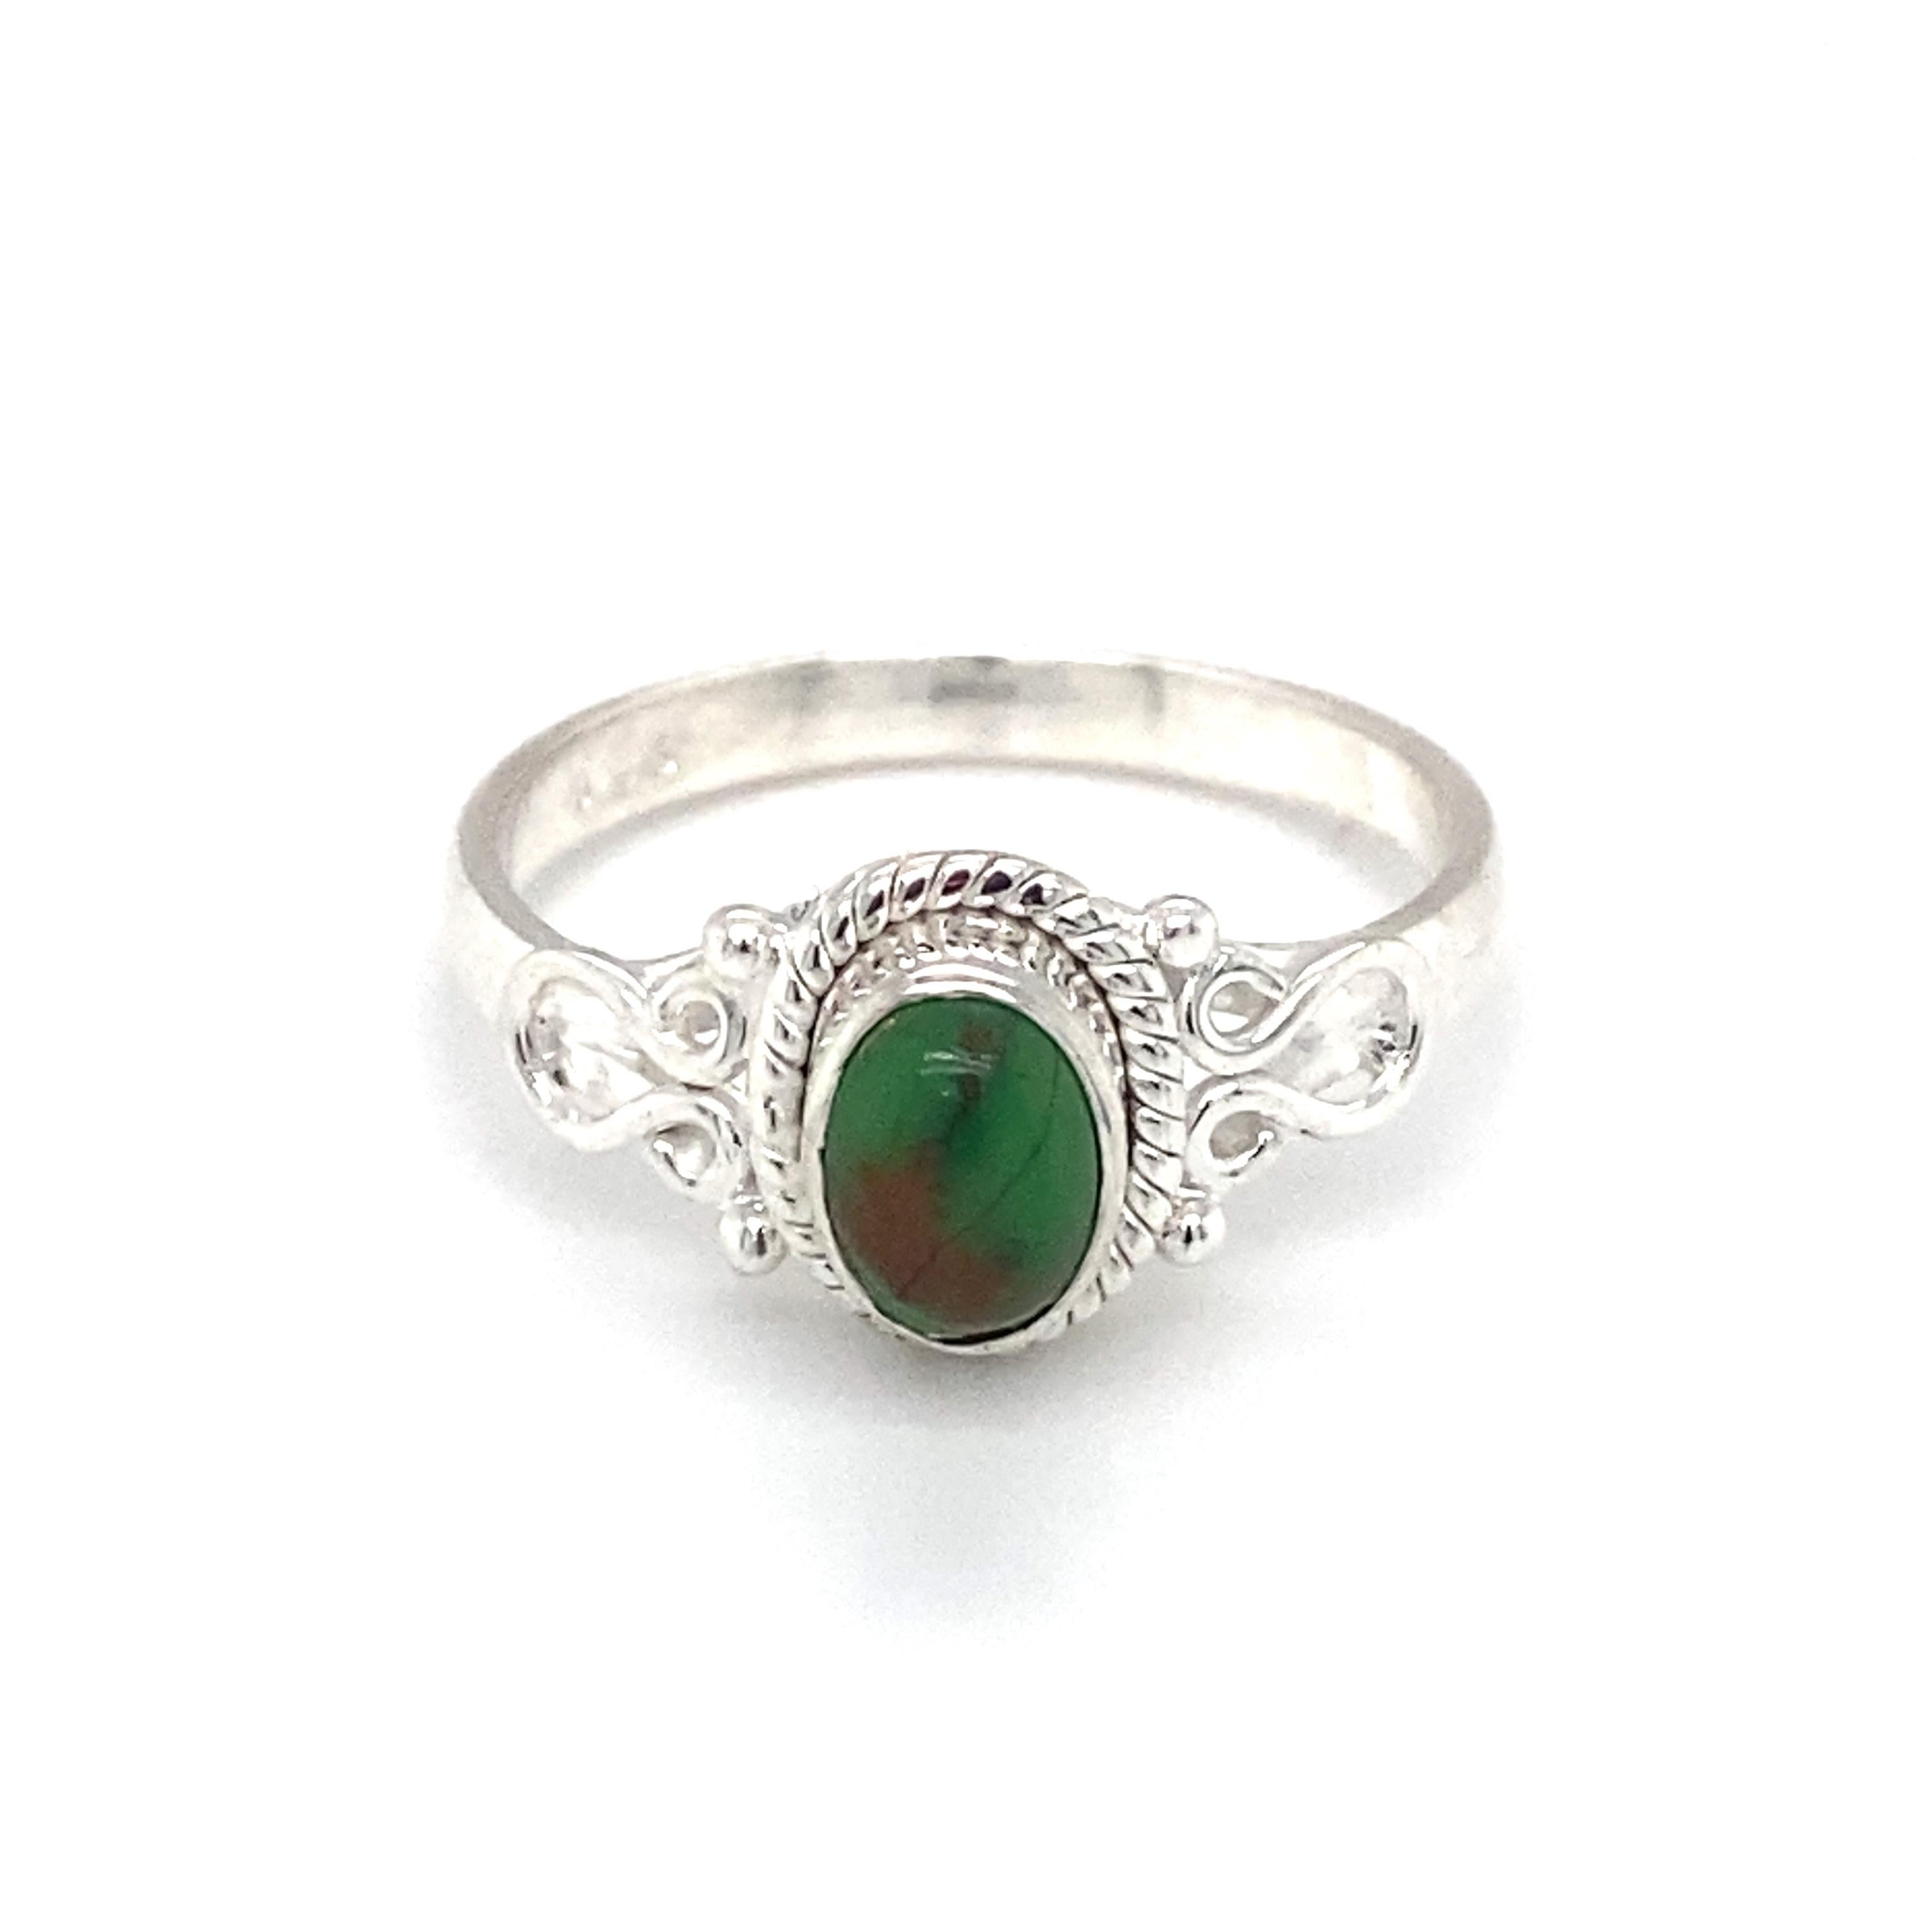 
Item Details: This southwestern-style ring has a center green turquoise with a rope bezel design and filigree on the sides.

Circa: 21st Century
Metal Type: Sterling silver
Weight: 3.2g
Size: US 9.5
